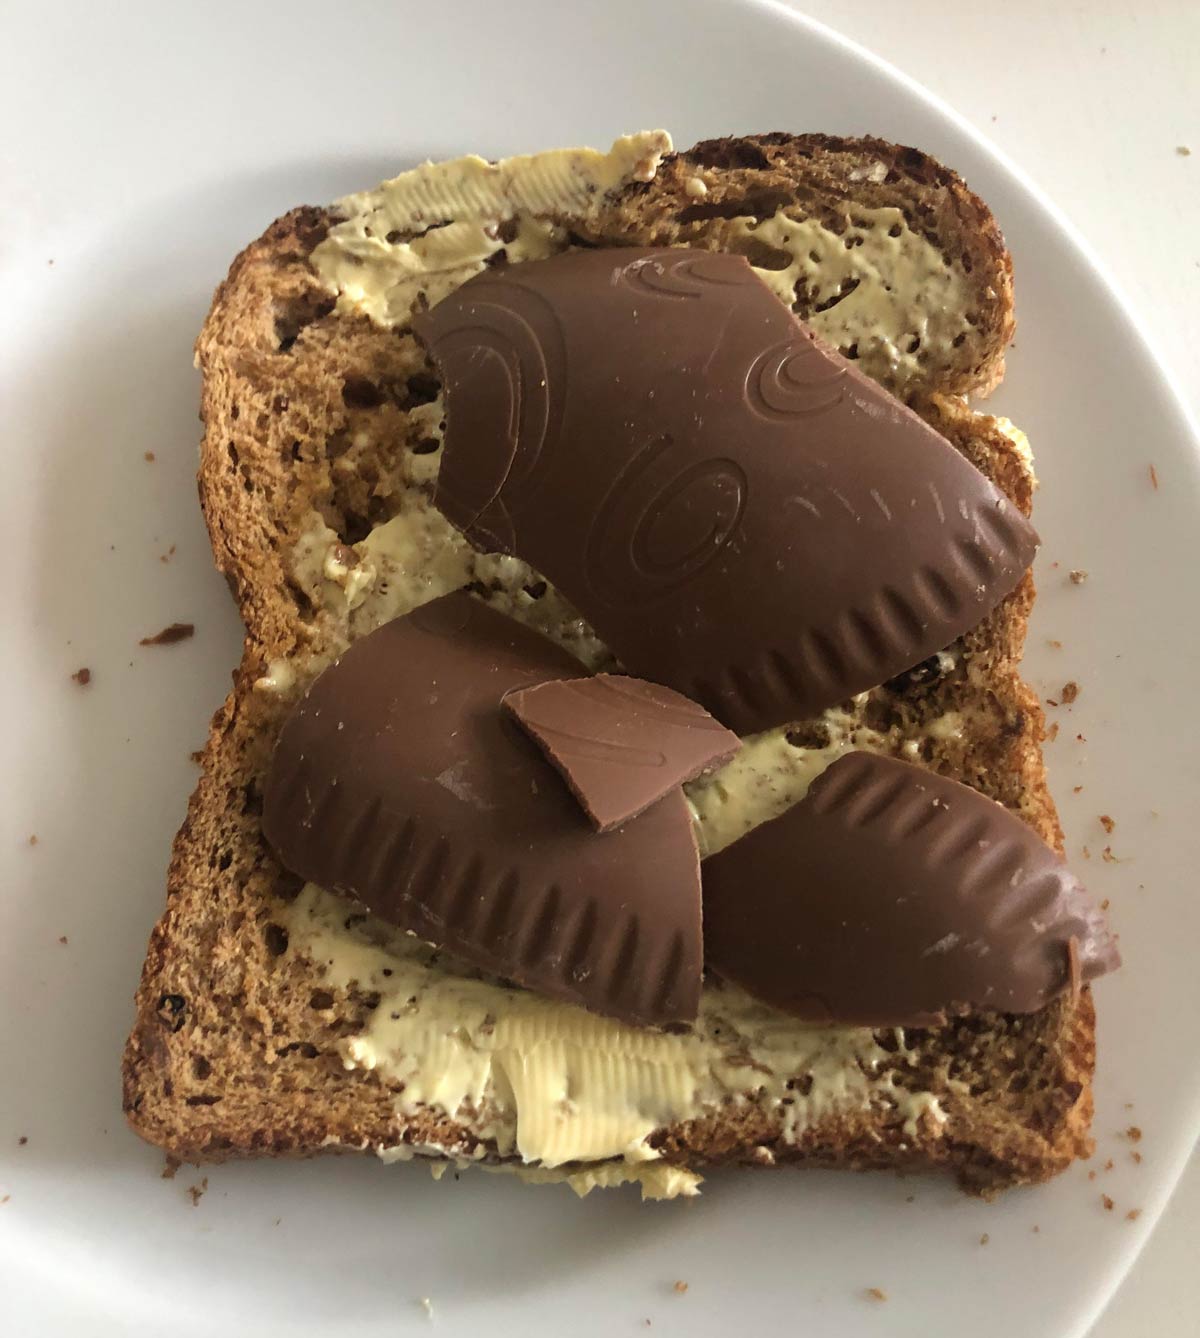 My wife thinks I’m doing Easter breakfast wrong. Anyone else enjoy eggs on toast?